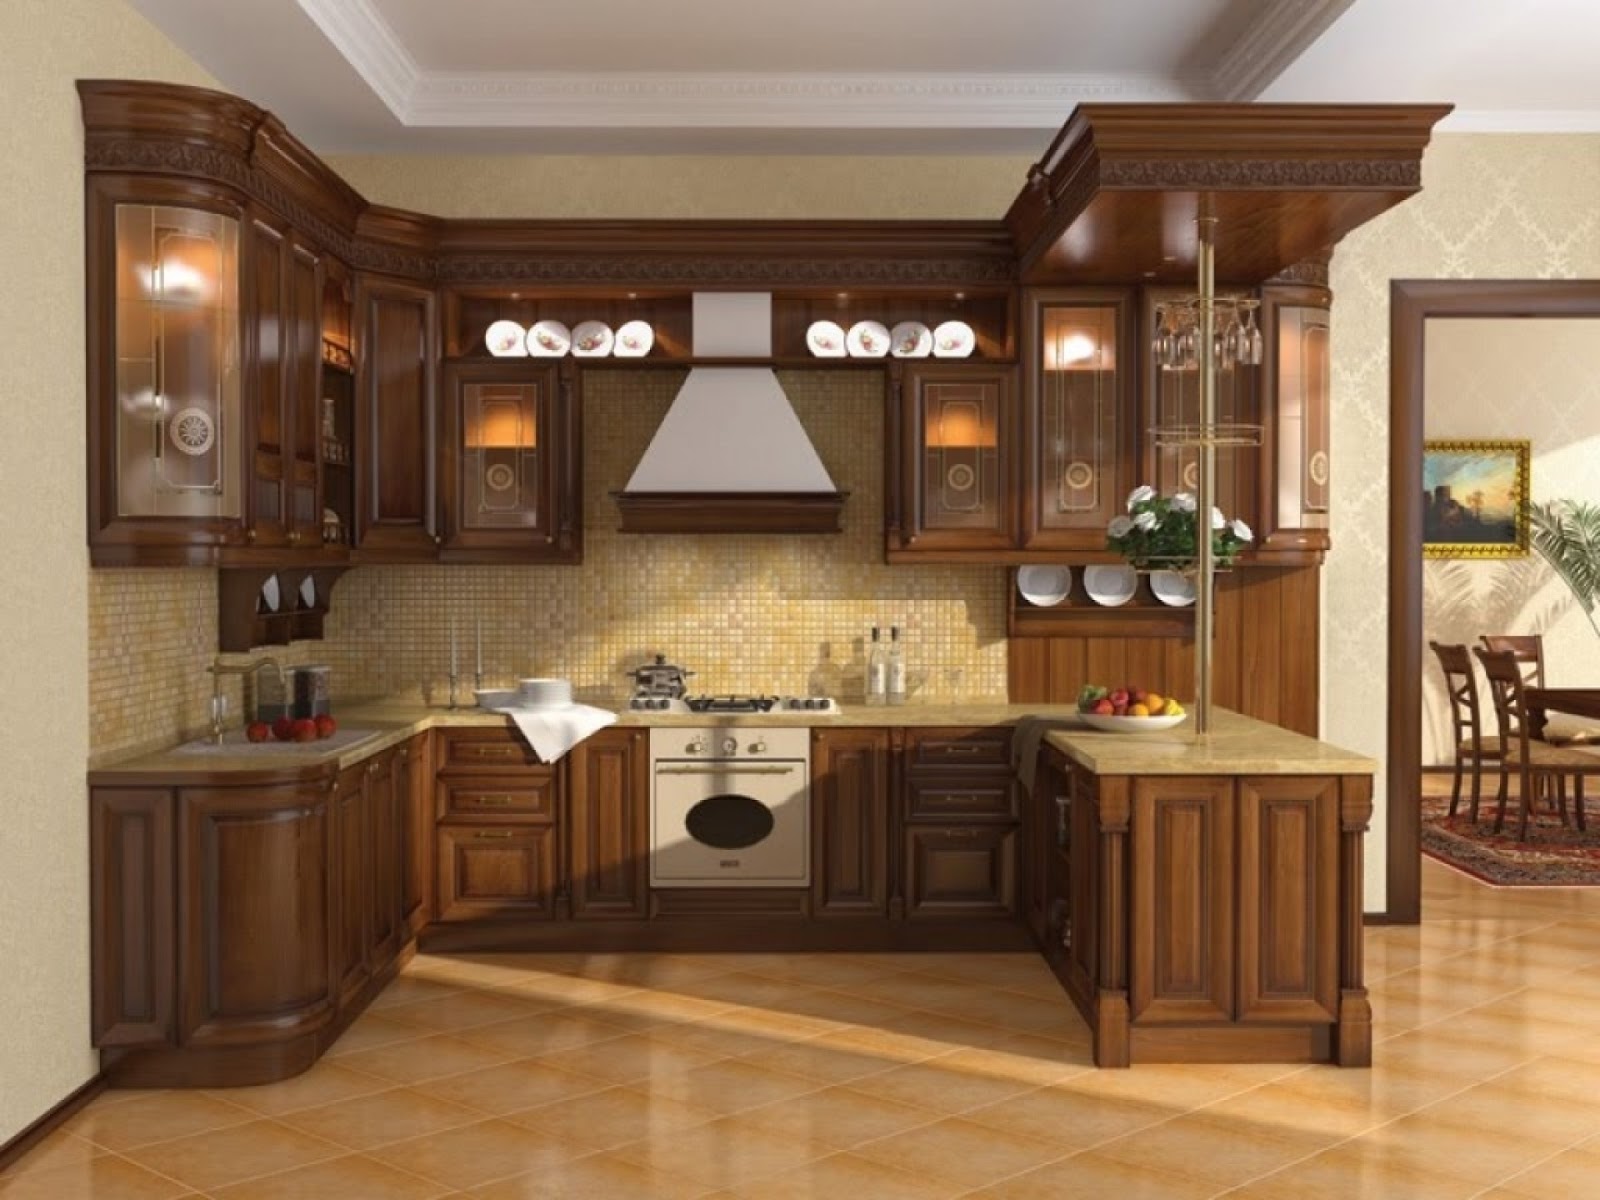 45 Mind Blowing Kitchen Cabinet Design Ideas | Engineering Discoveries